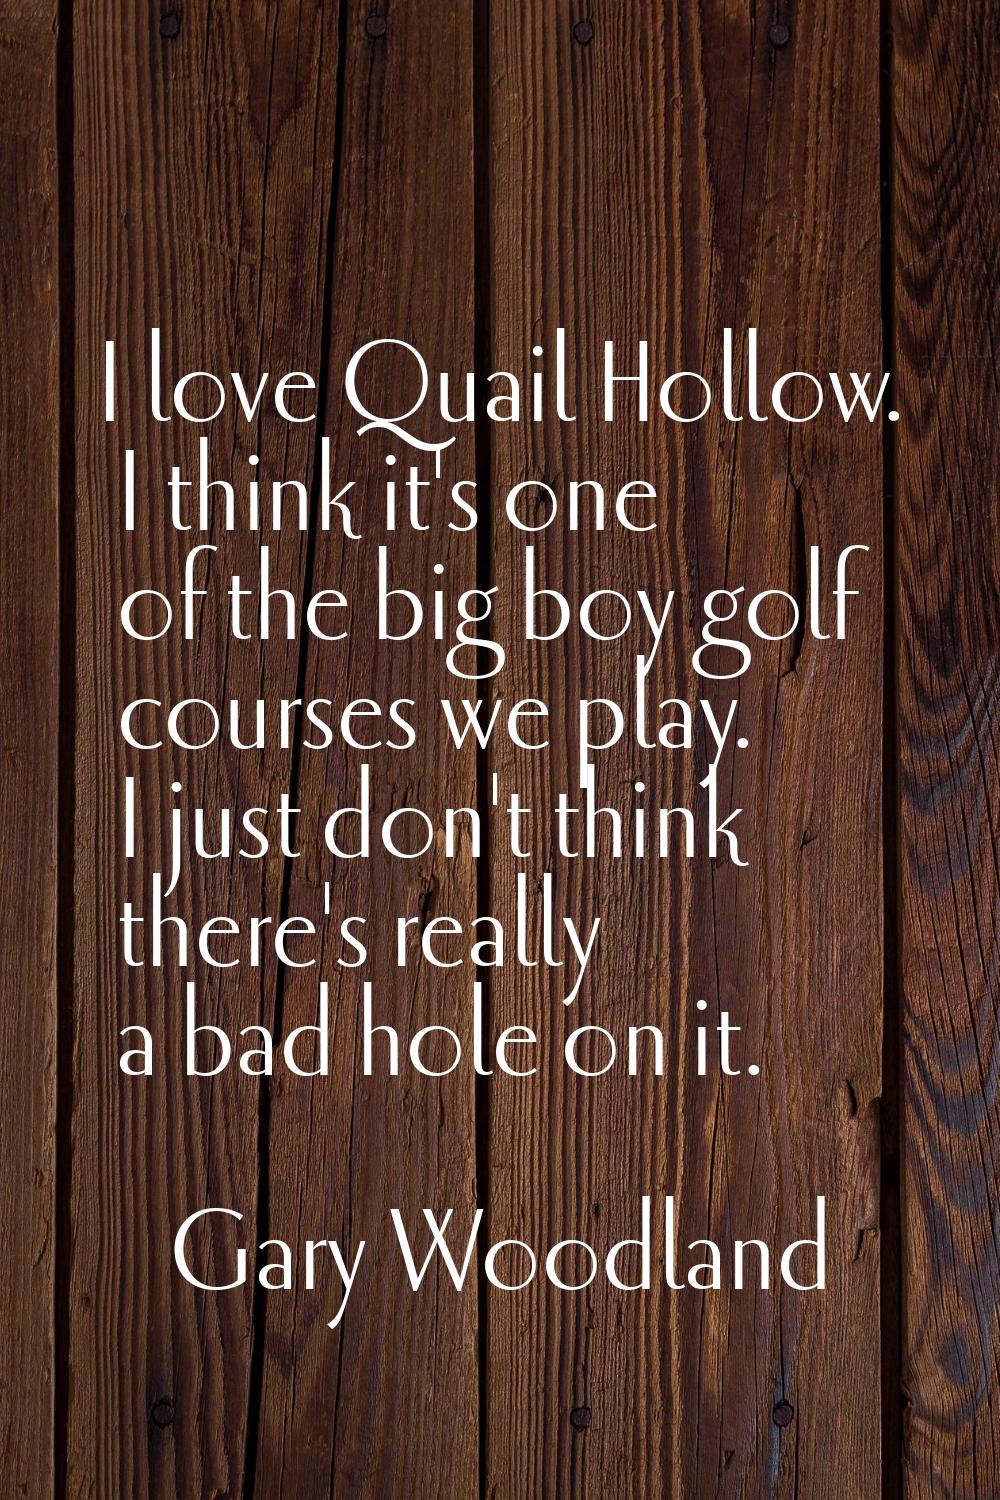 I love Quail Hollow. I think it's one of the big boy golf courses we play. I just don't think there